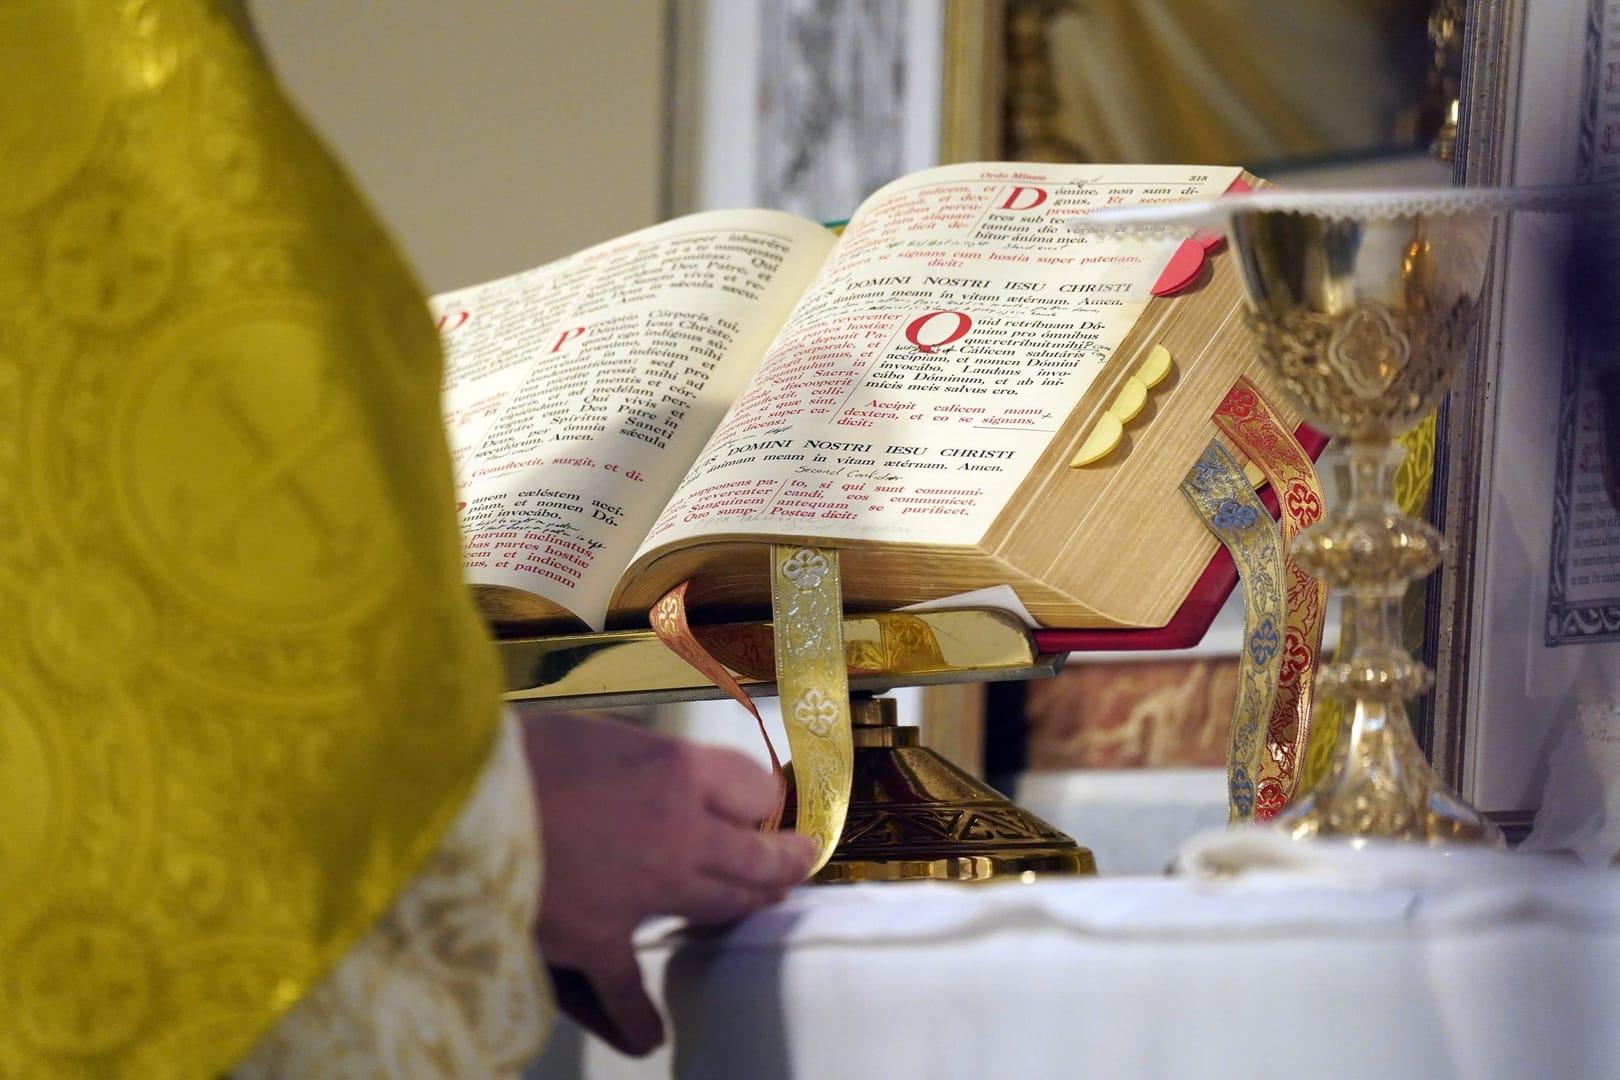 Traditional Latin Mass ‘movement’ sows division, archbishop says